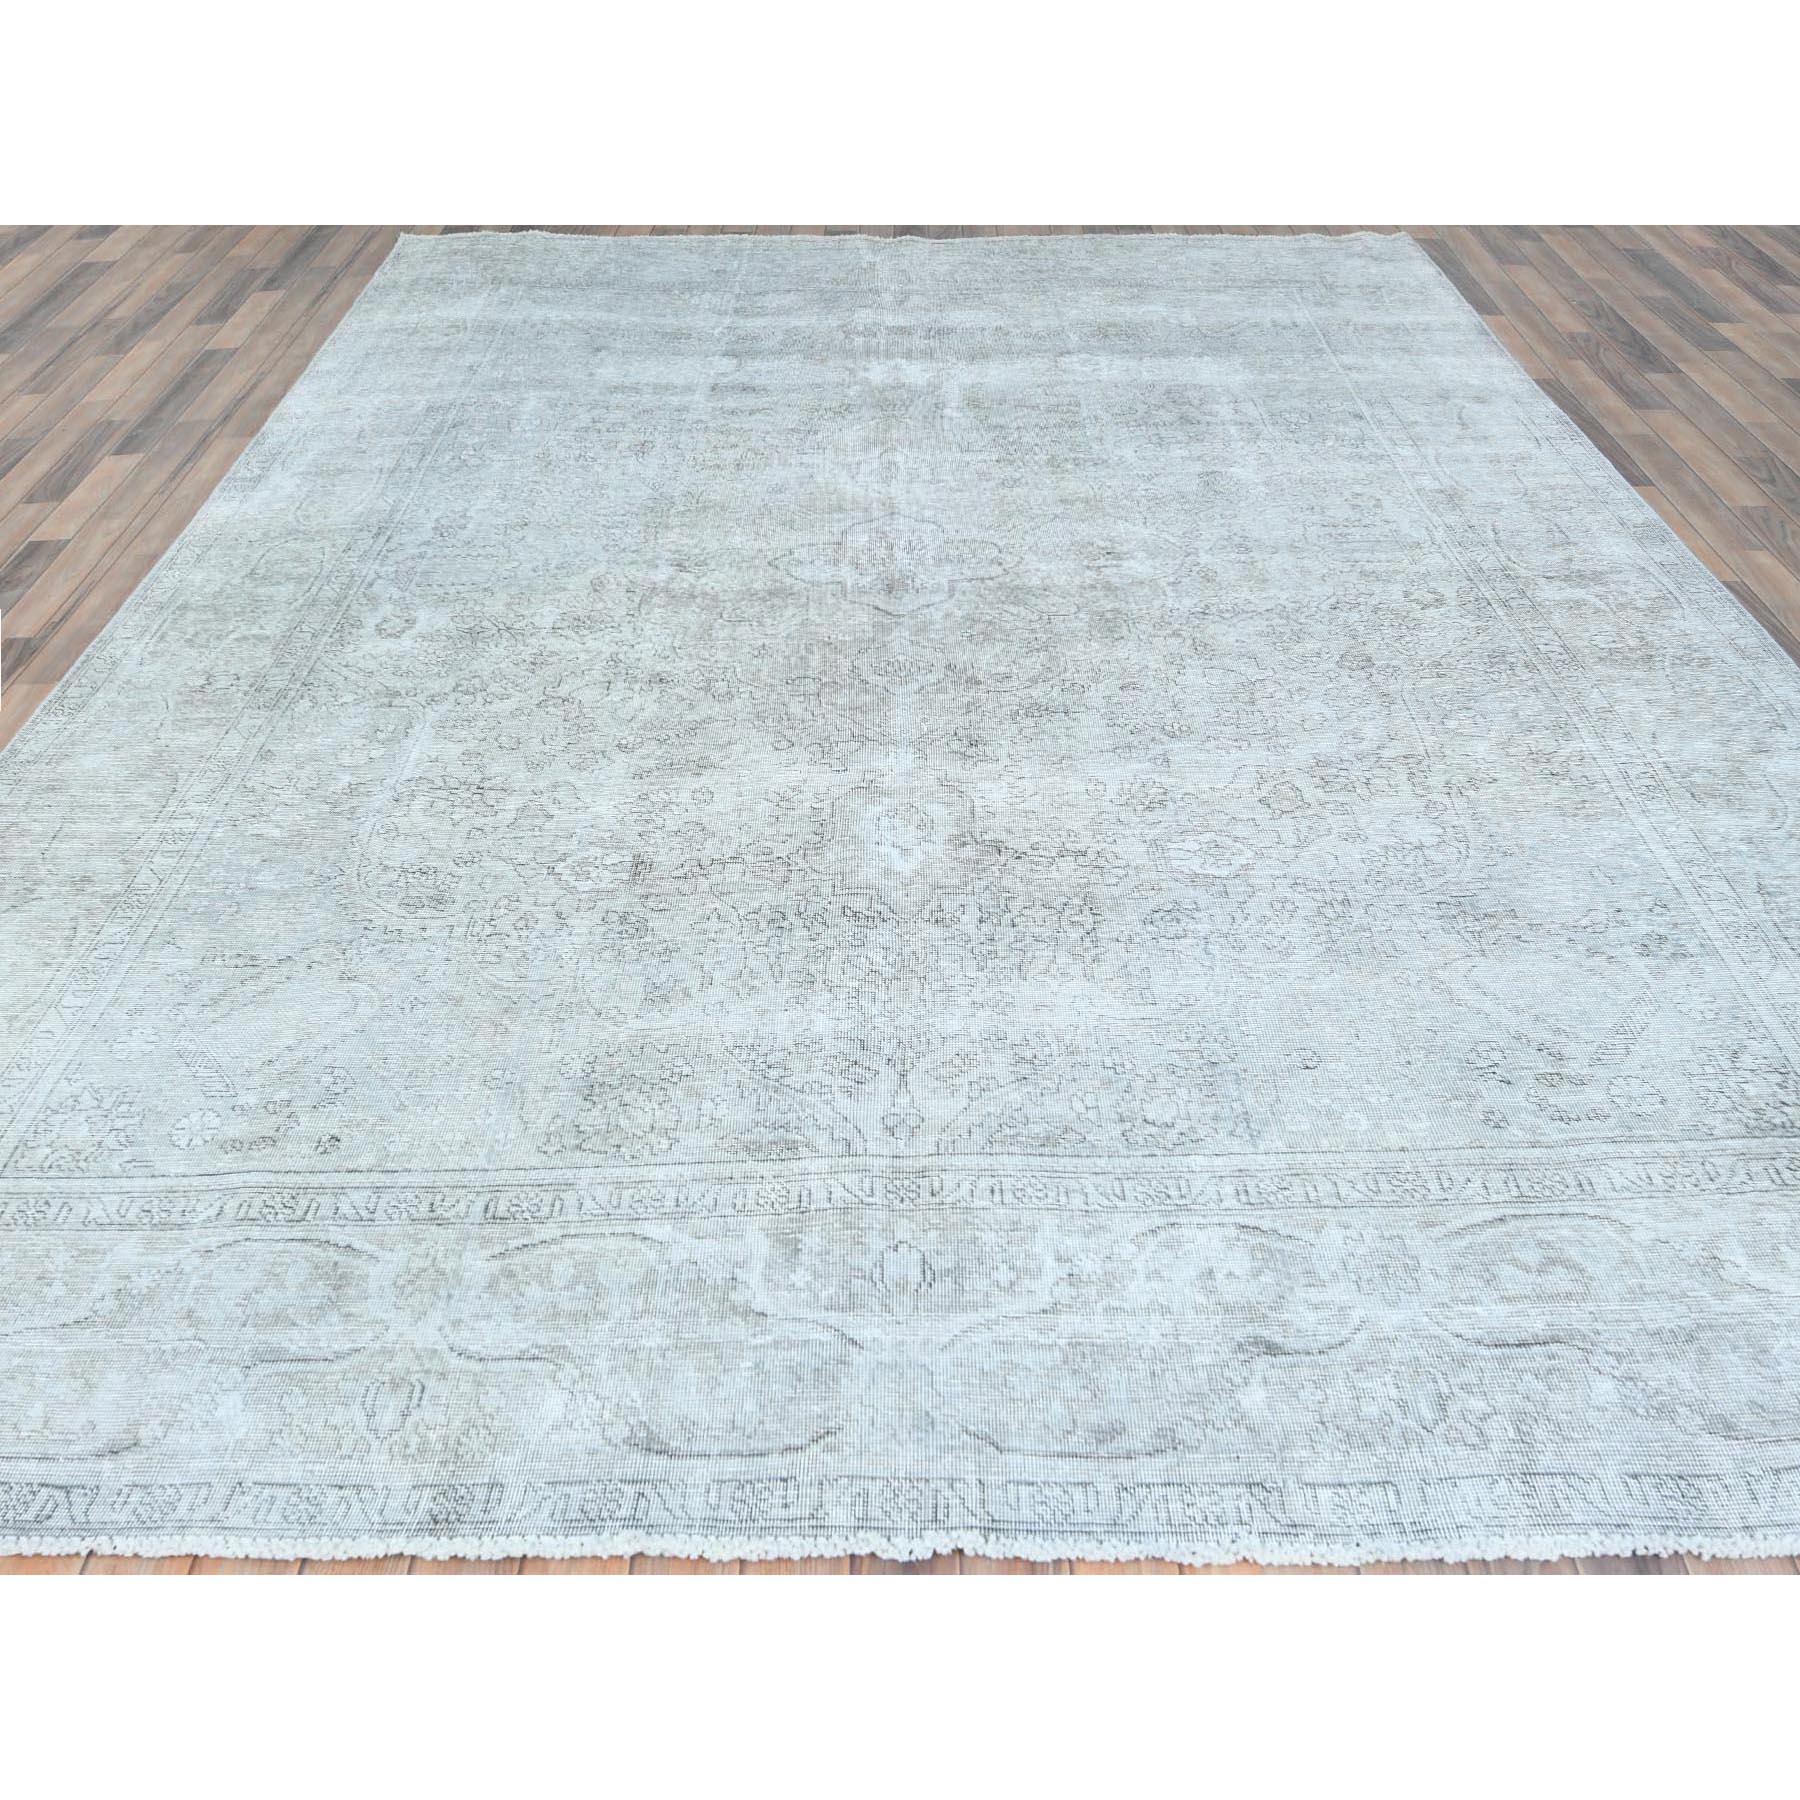 Medieval Blueish Gray Worn Down Rustic Feel Wool Hand Knotted Vintage Persian Tabriz Rug For Sale